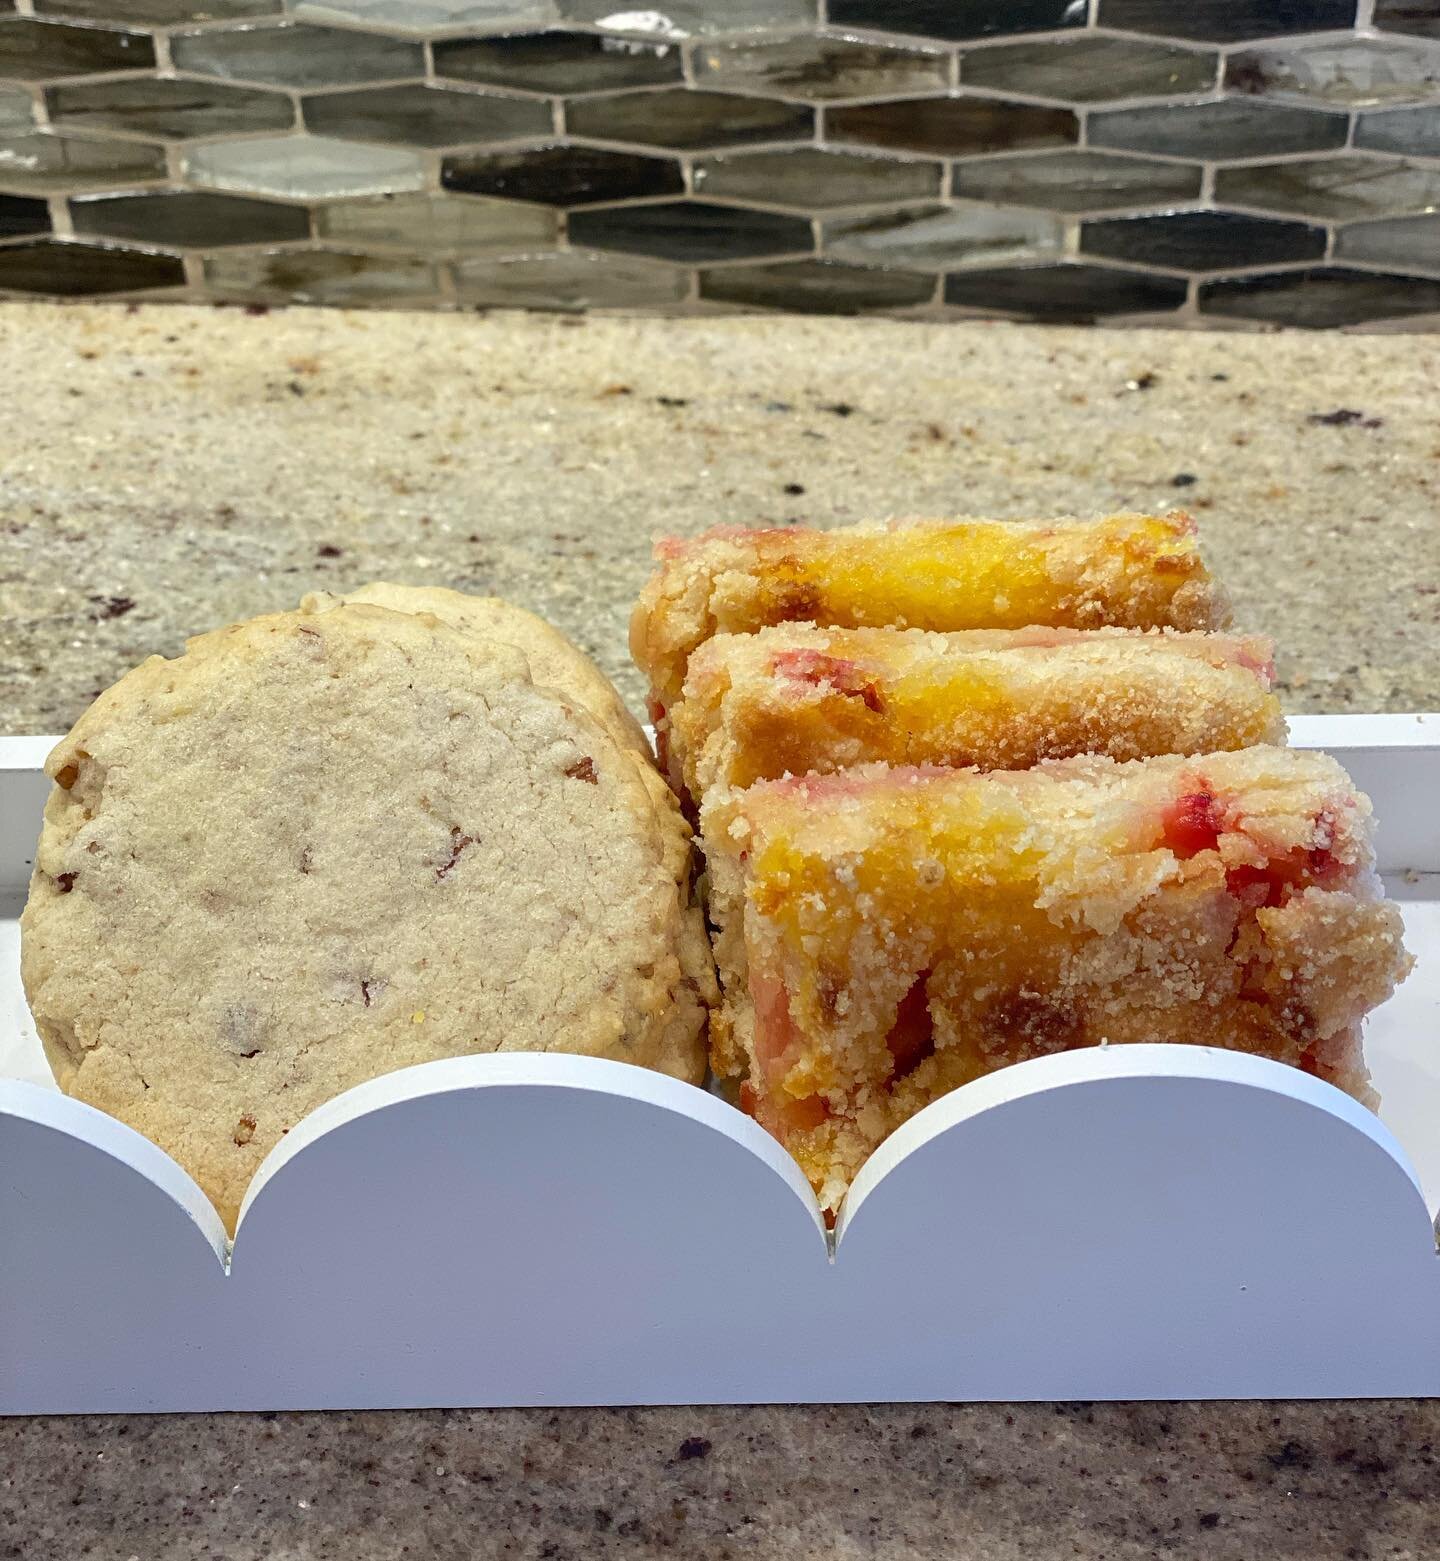 Who&rsquo;s ready for new treats?? I spent the last week perfecting 2 new treats! The #fishhusband made a  request for Pecan Sandies &amp; I&rsquo;ve been thinking of a Strawberry Lemonade Bar for weeks now! I have to say both items are pretty amazin